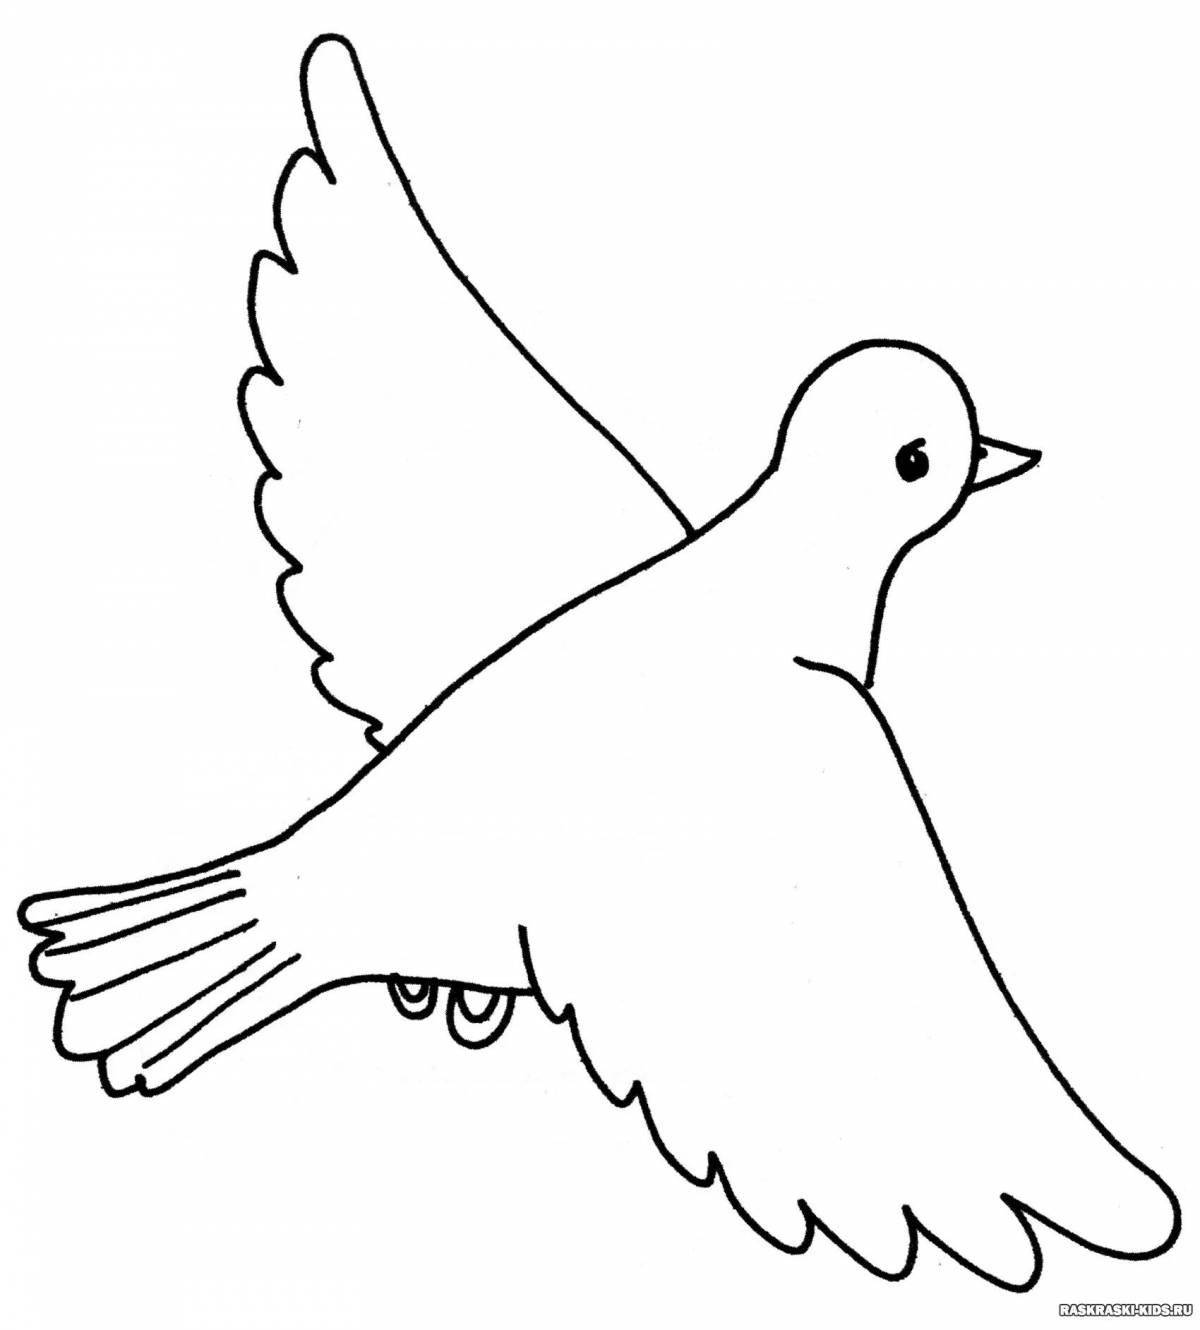 Exquisite dove of peace coloring book for kids